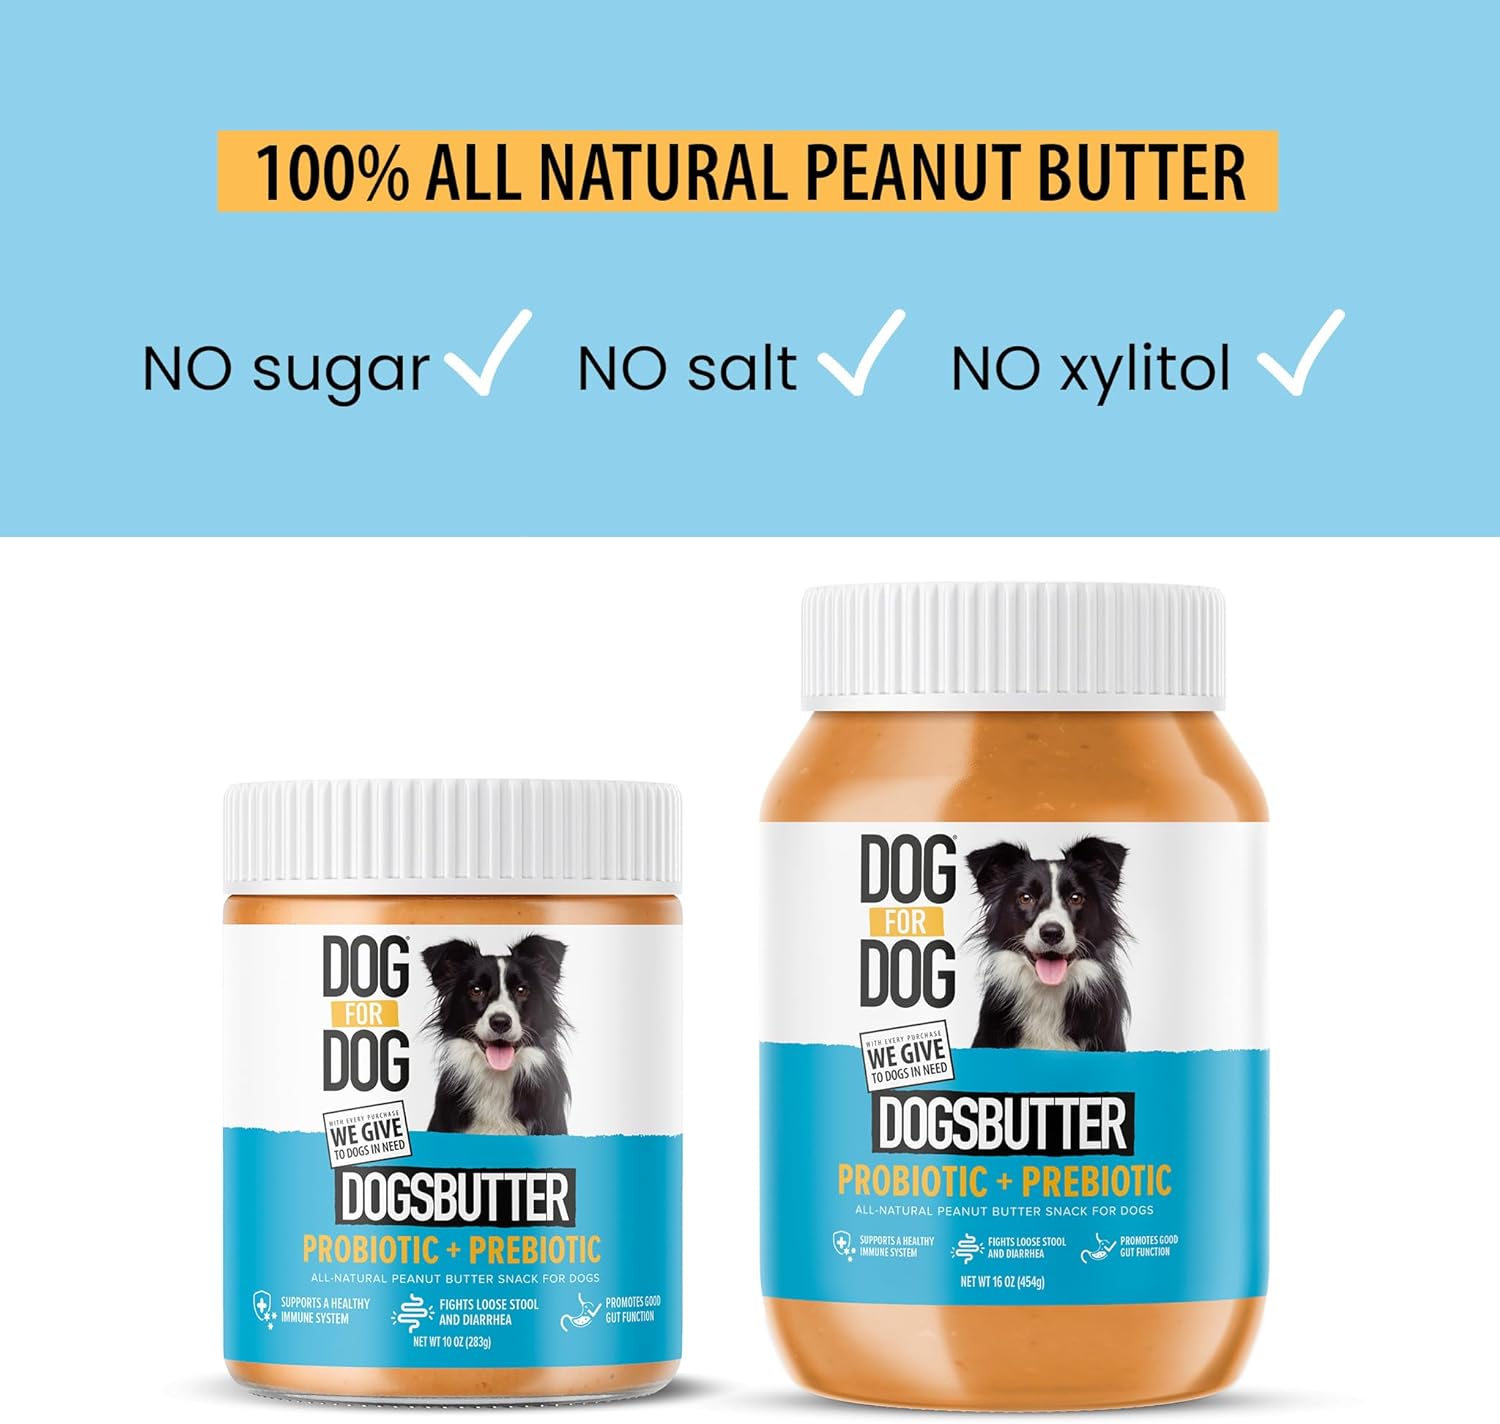 DOG for DOG Peanut Butter with Prebiotic & Probiotics | Dog Friendly Peanut Butter for Dogs Treats Improves Immune System & Gut Health | Dog Probiotic Calming Treats for Itchy Skin - Made in USA, 10oz : Pet Supplies